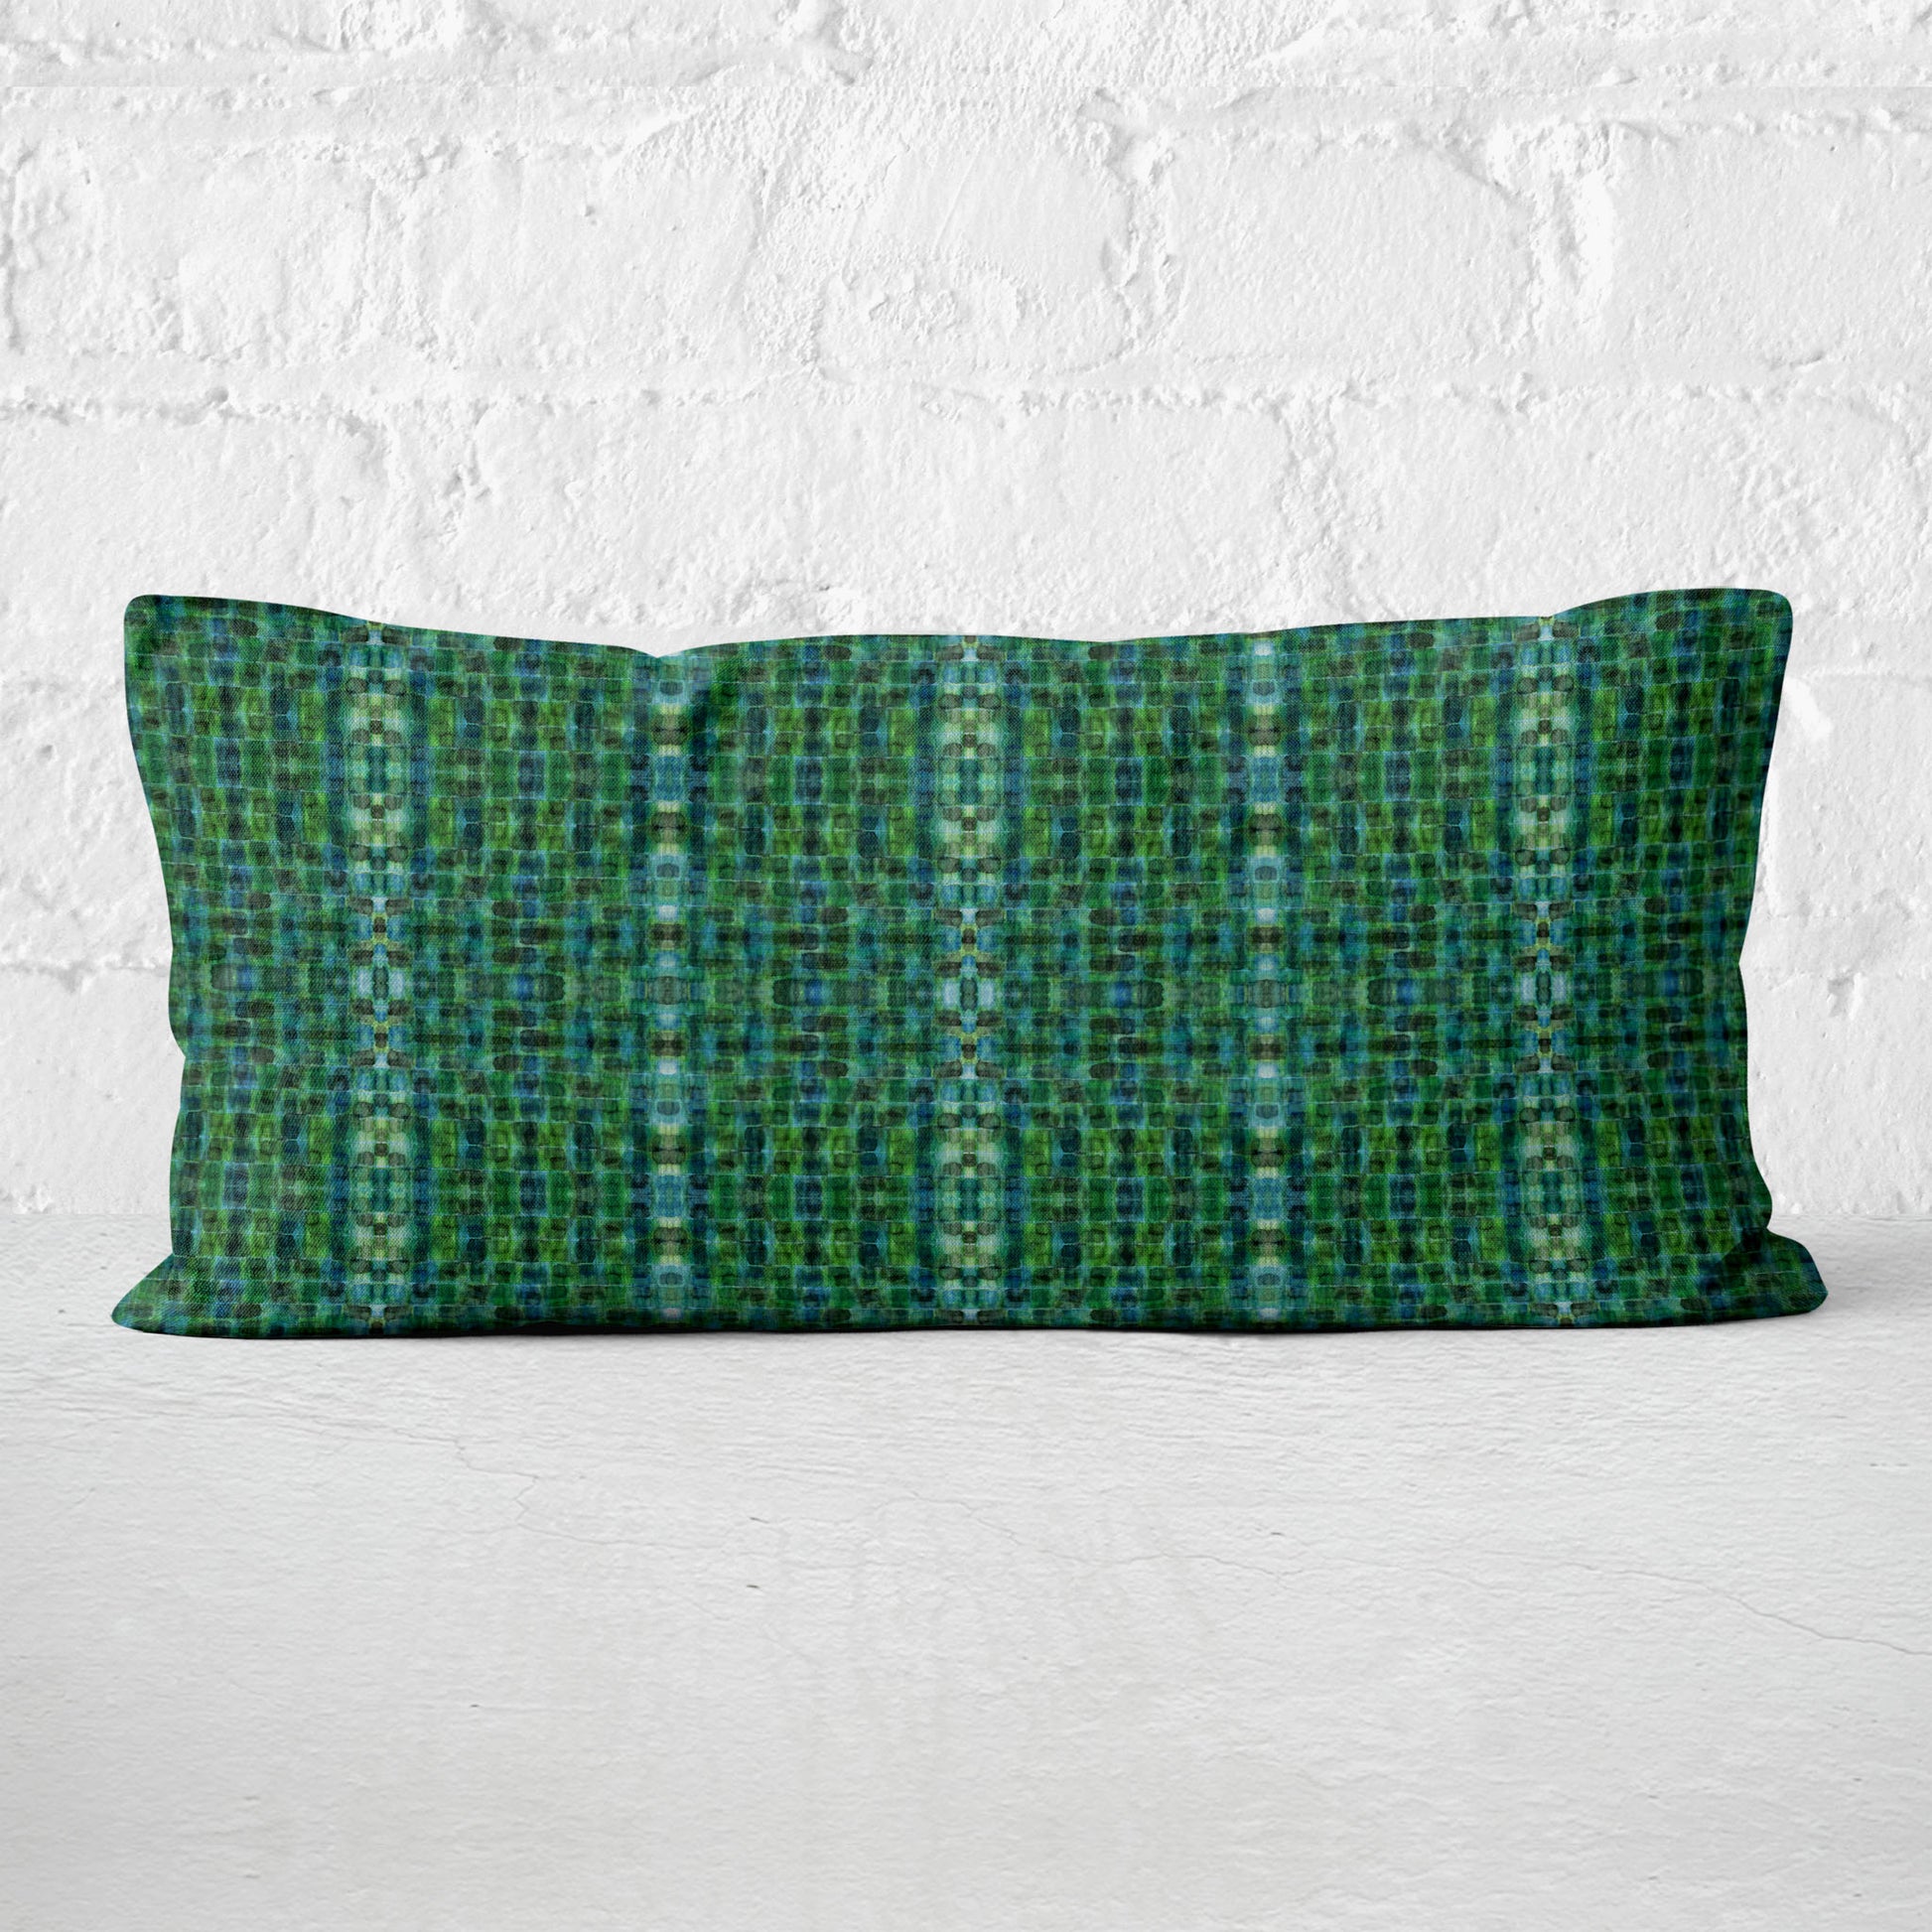 Rectangular lumbar pillow featuring a hand-painted abstract plaid pattern in kelly green.